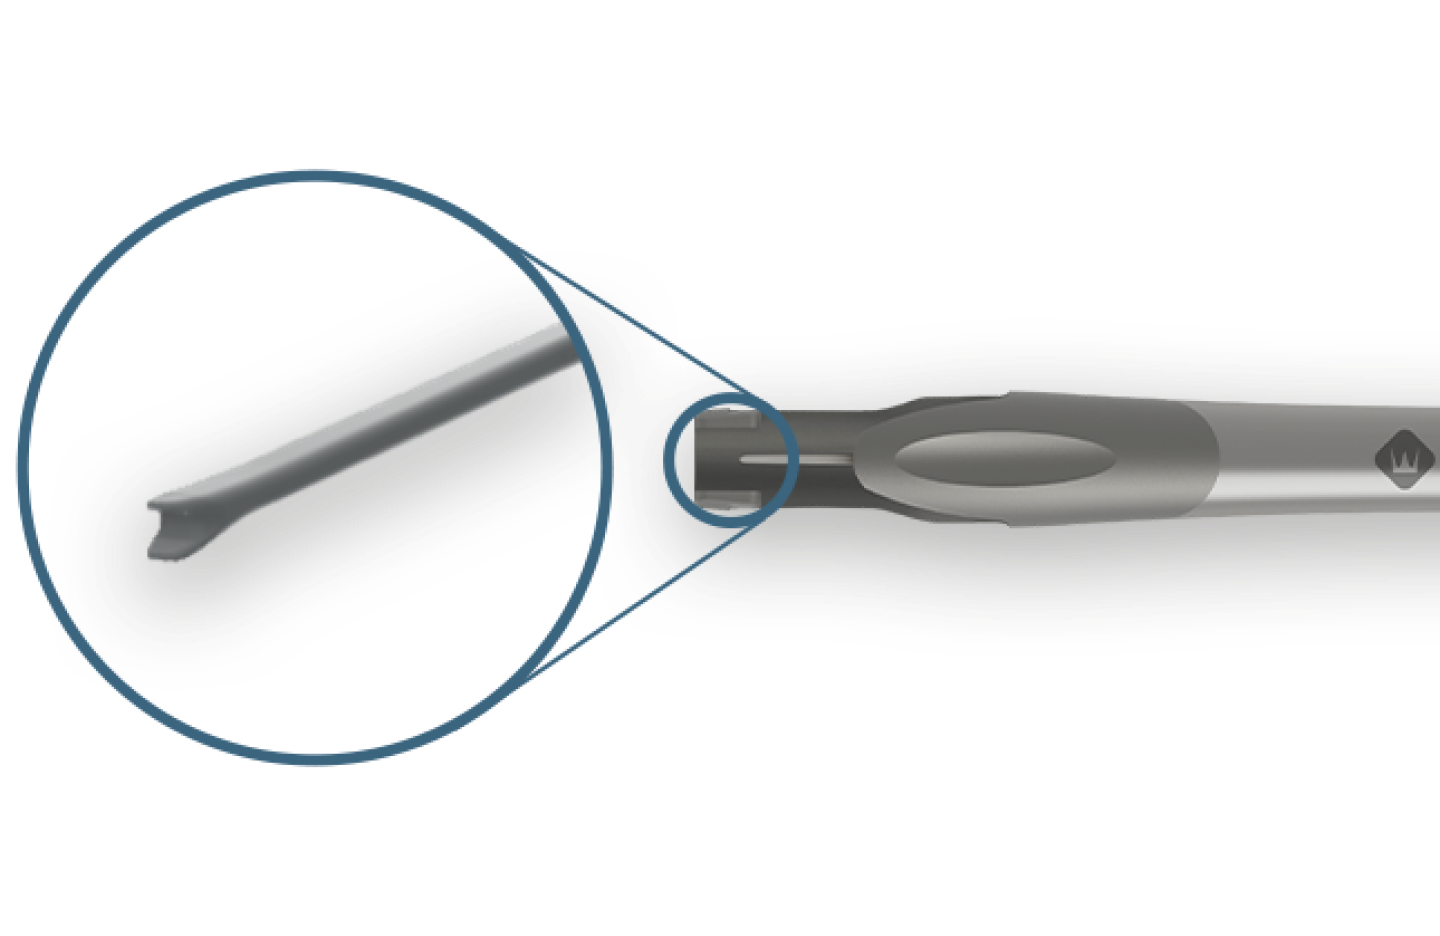 Clareon Monarch IV Handpiece sits horizontally. A blue circle is placed on the device to draw focus to its plunger tip.